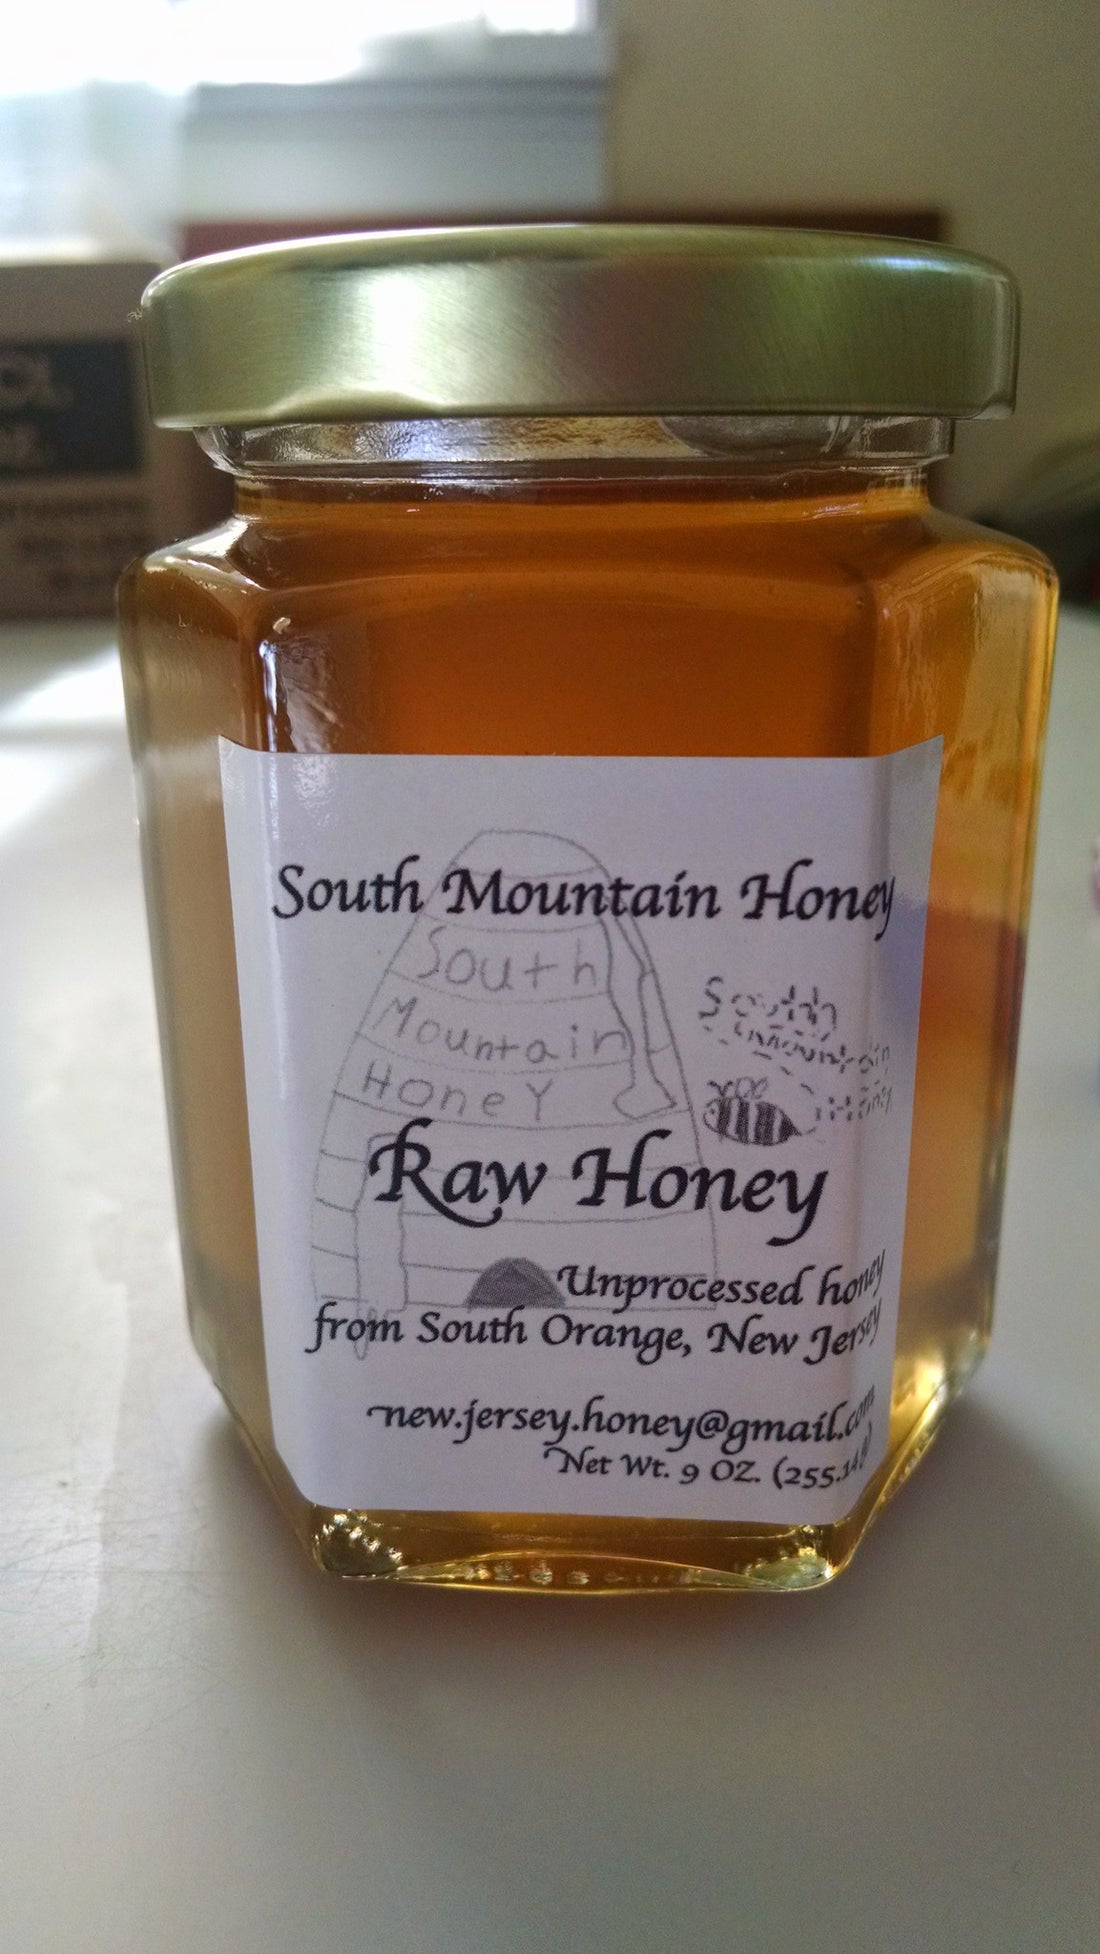 What is Raw Honey?